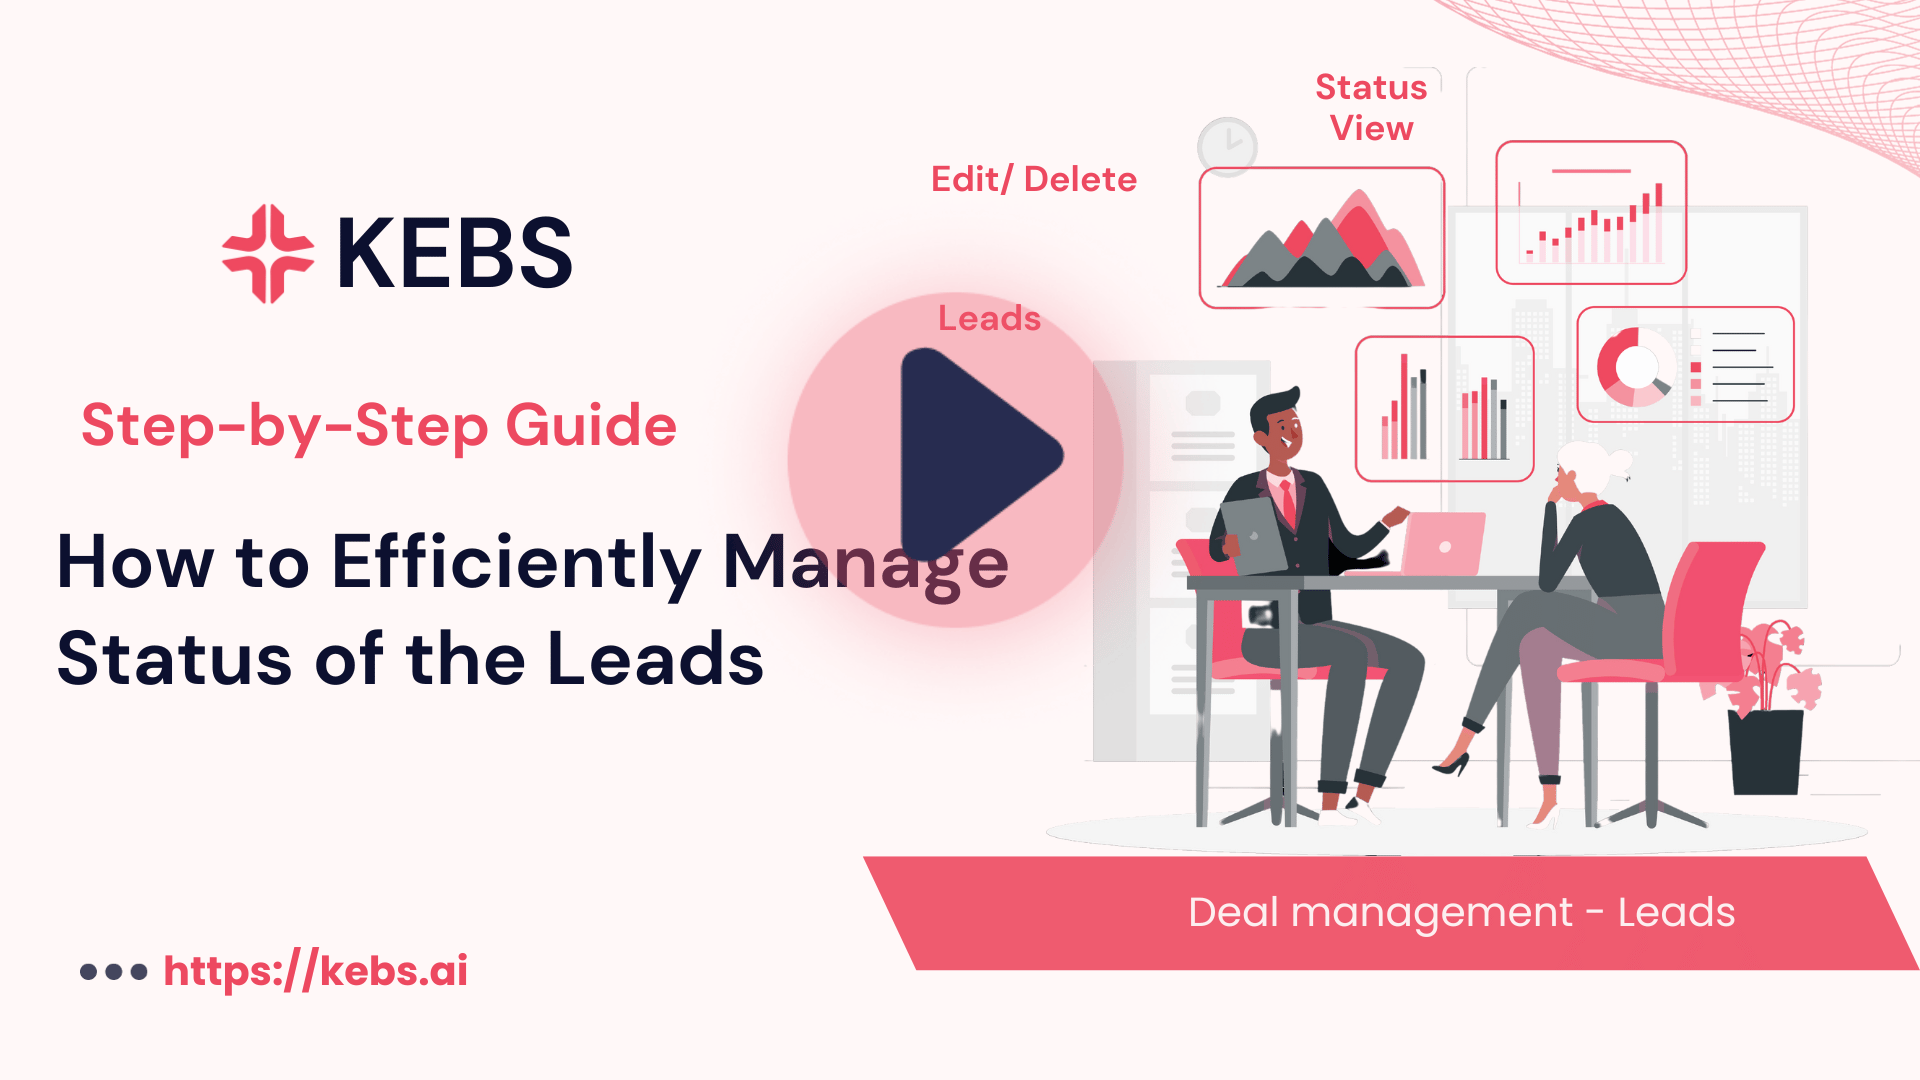 How to Efficiently Manage Status of the Leads